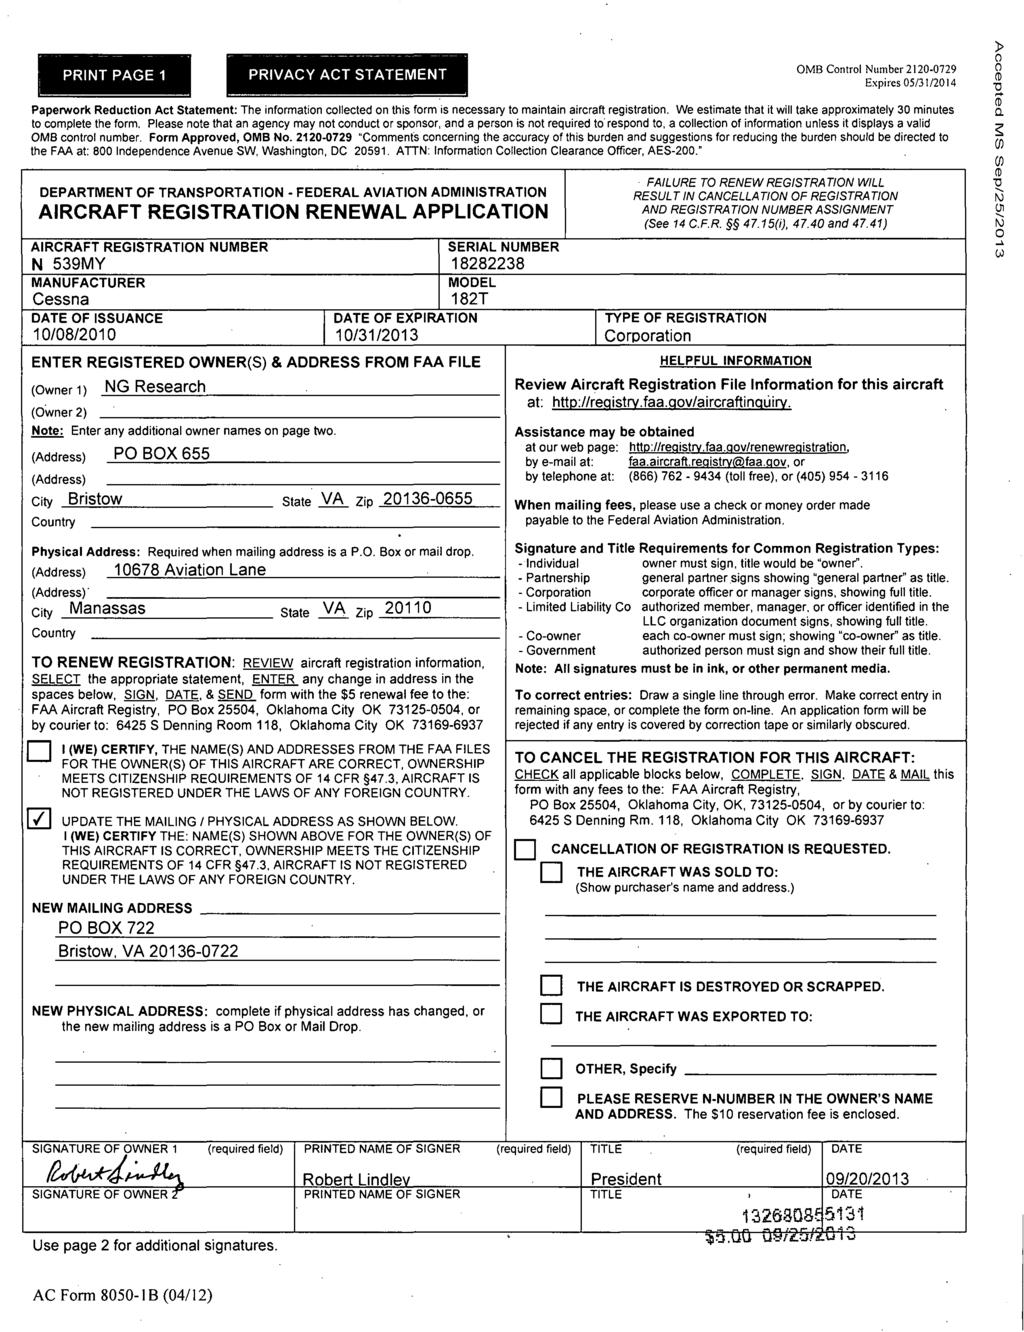 r -- - - I PRINT PAGE 1 ~ - - - - ------- - - -- - - - - PRIVACY ACT STATEMENT OMB Control Number 212-729 Expires 5/31/214 Paperwork Reduction Act Statement: The information collected on this form is